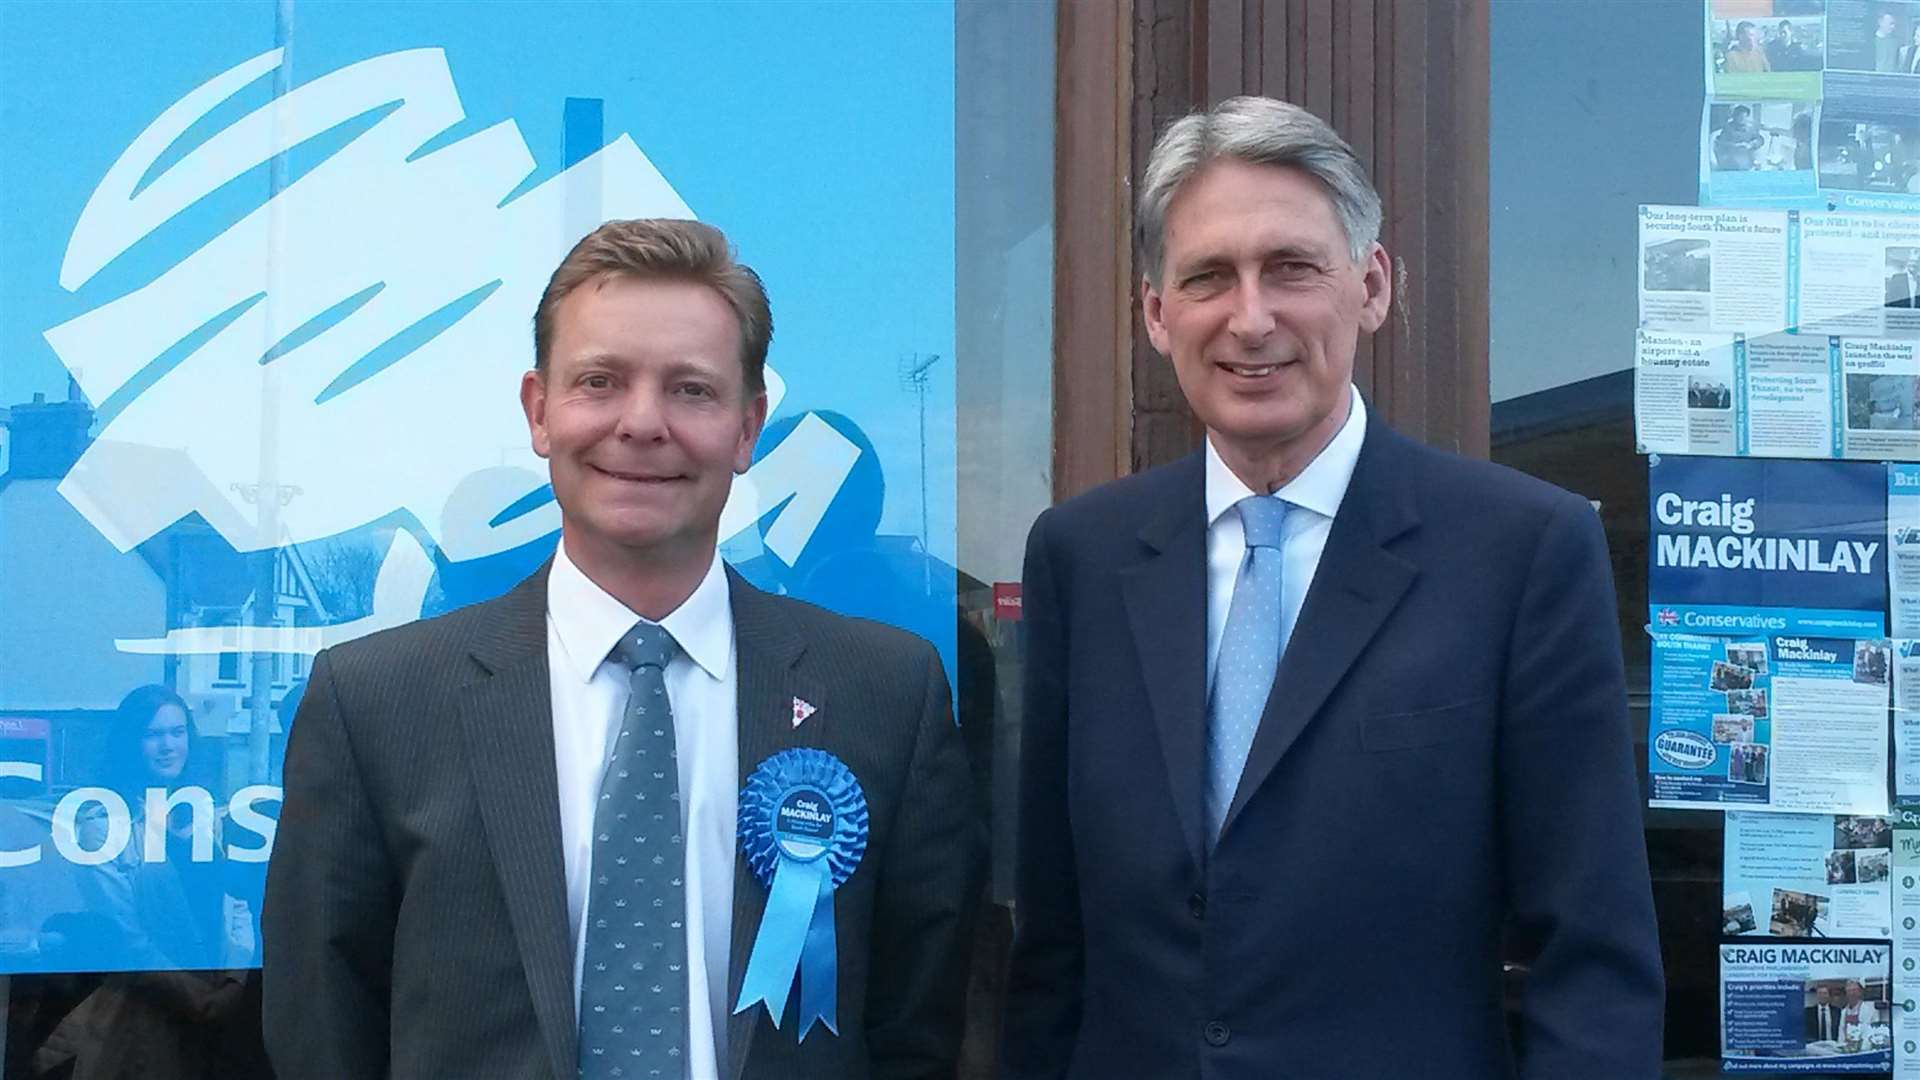 Craig Mackinlay was chosen as South Thanet election candidate, pictured here with then Foreign Secretary Philip Hammond in May 2015